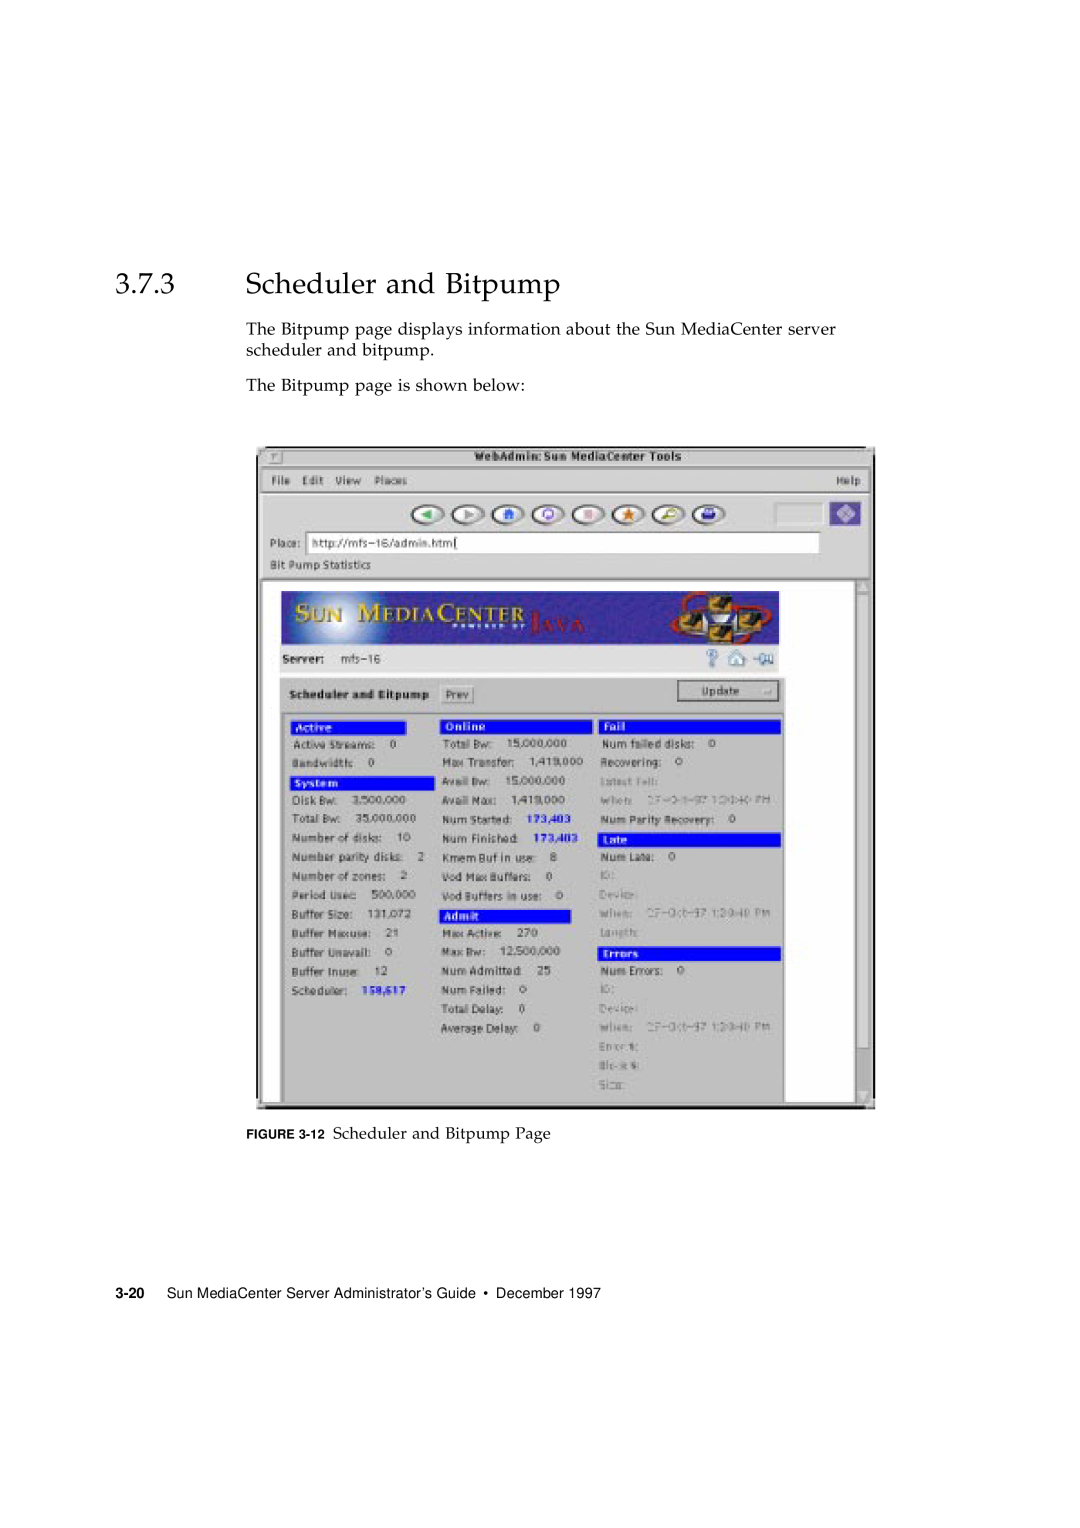 Sun Microsystems 2.1 manual Scheduler and Bitpump, The Bitpump page is shown below 